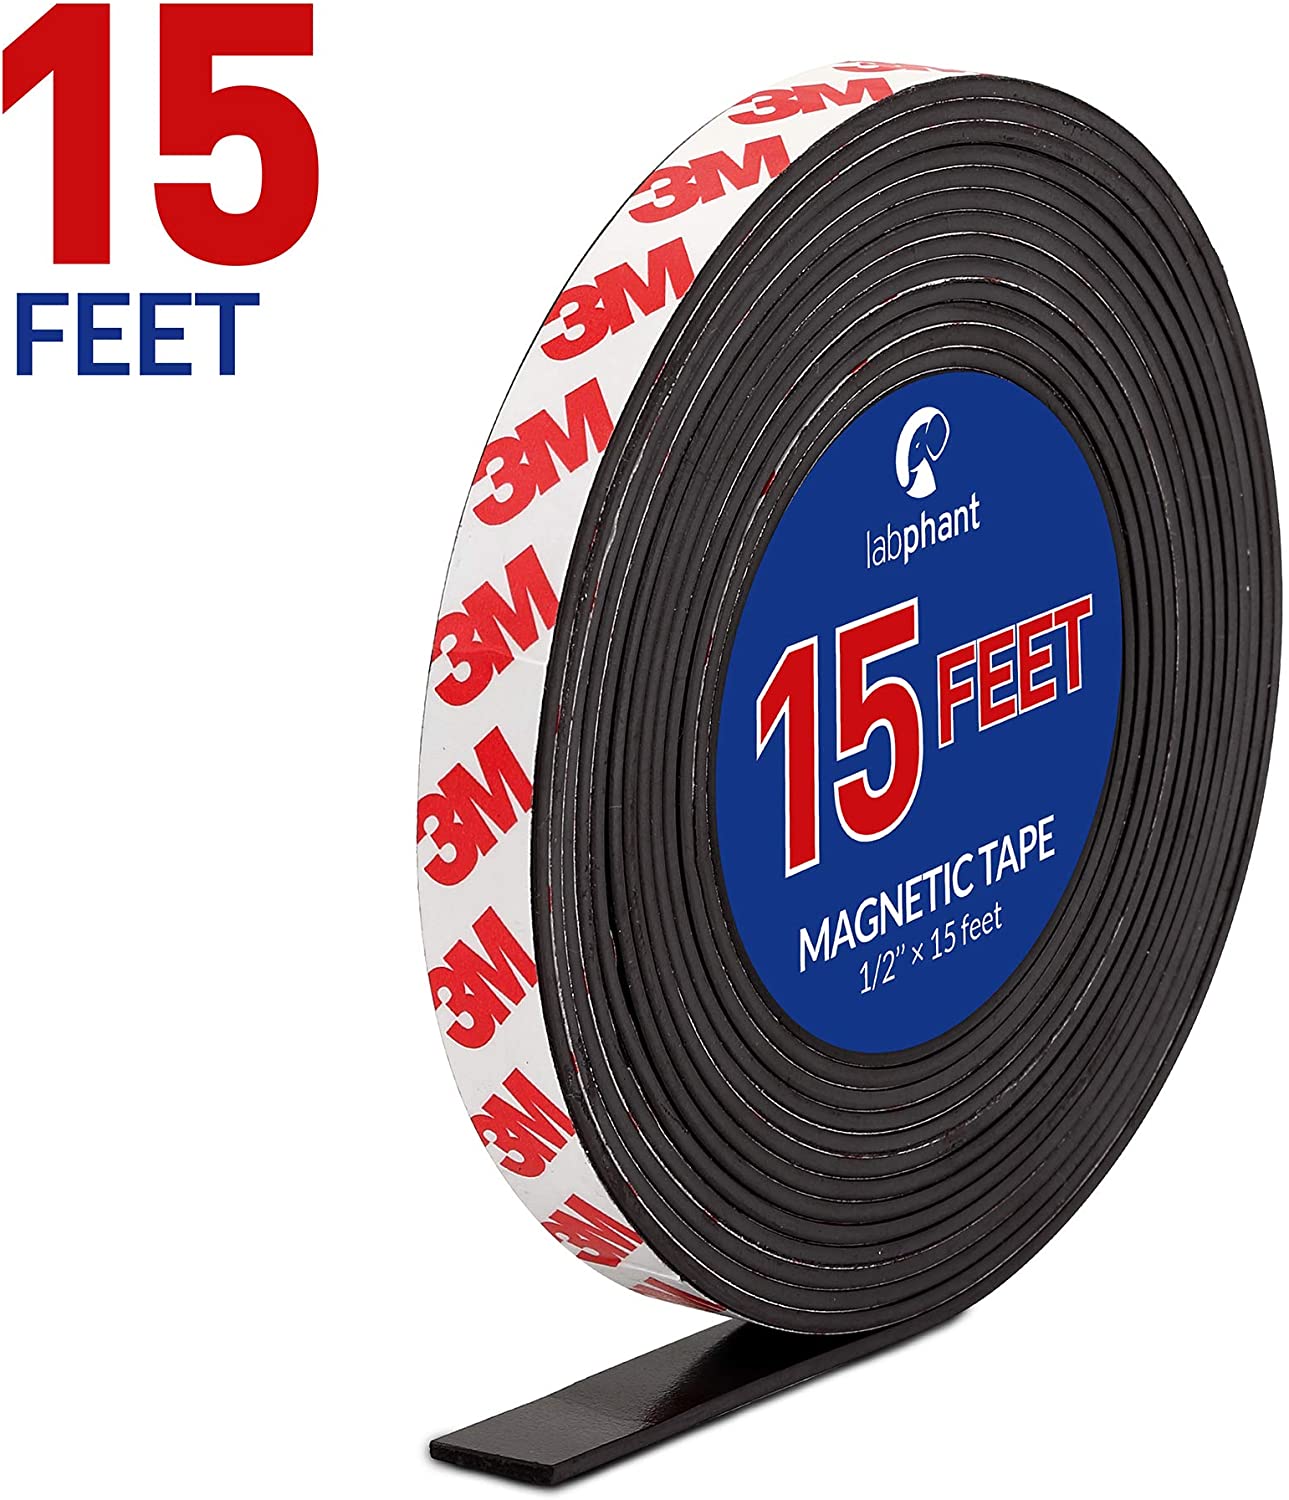 3M Adhesive Magnetic Tape Roll